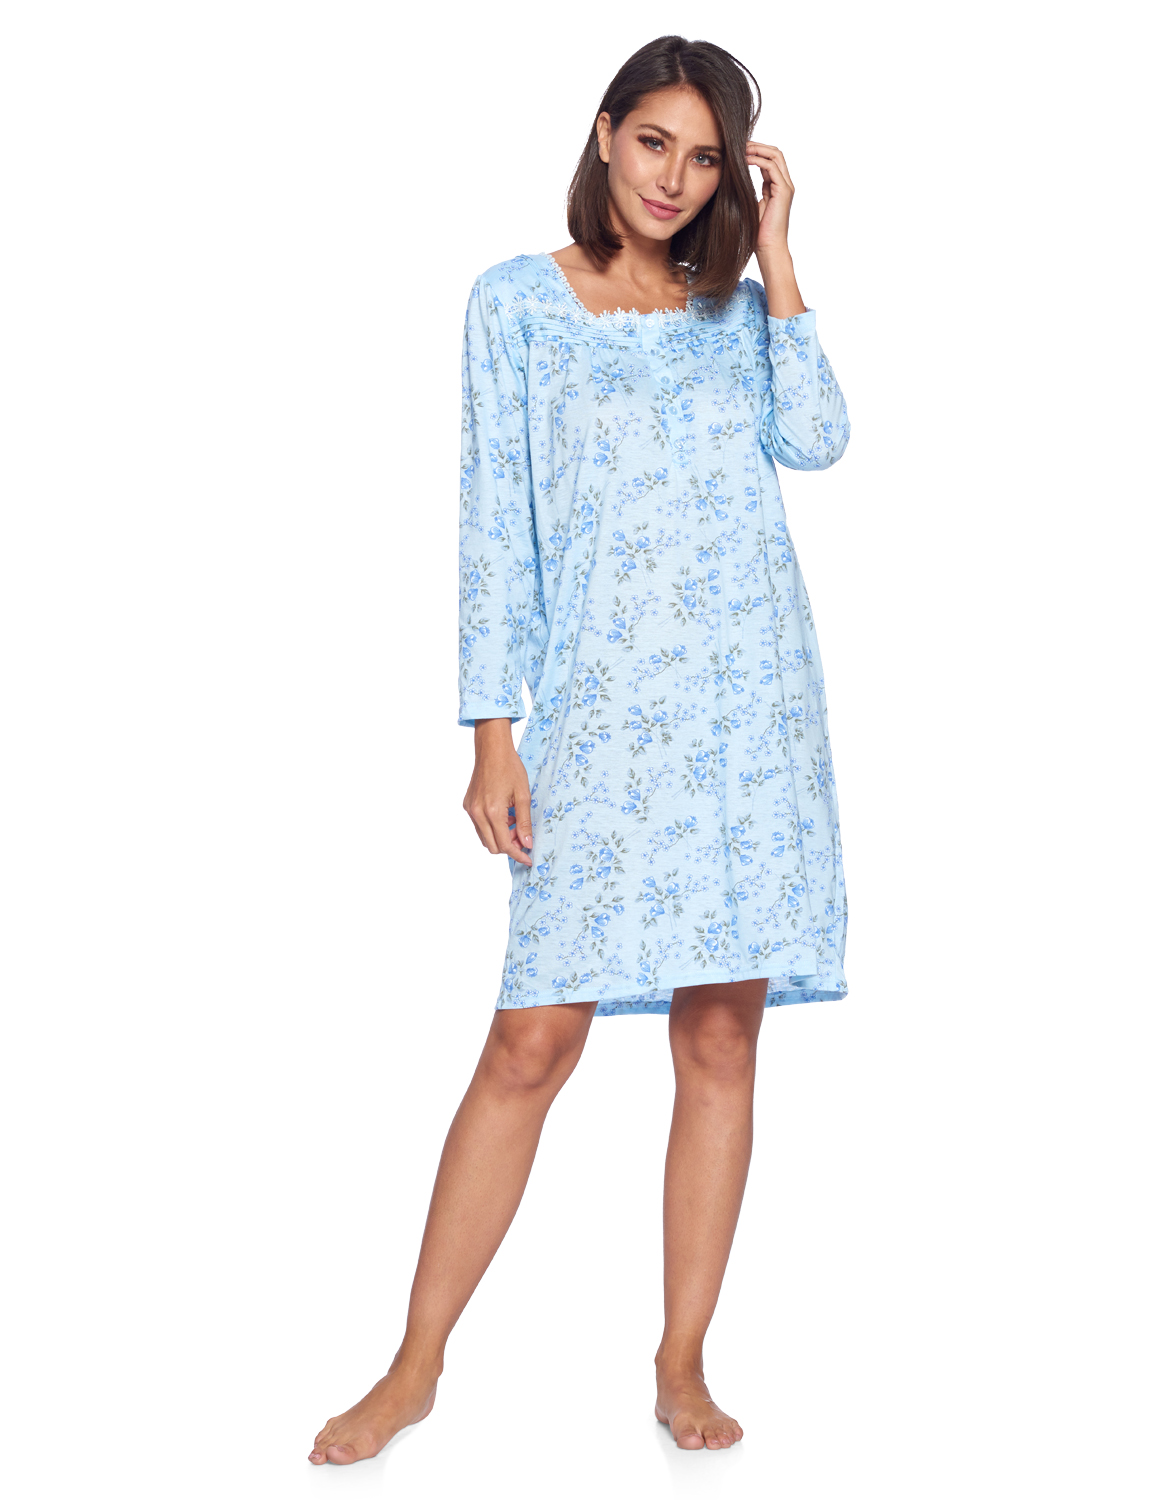 Casual Nights Women's Printed Long Sleeve Nightgown - Blue Floral LA656BL